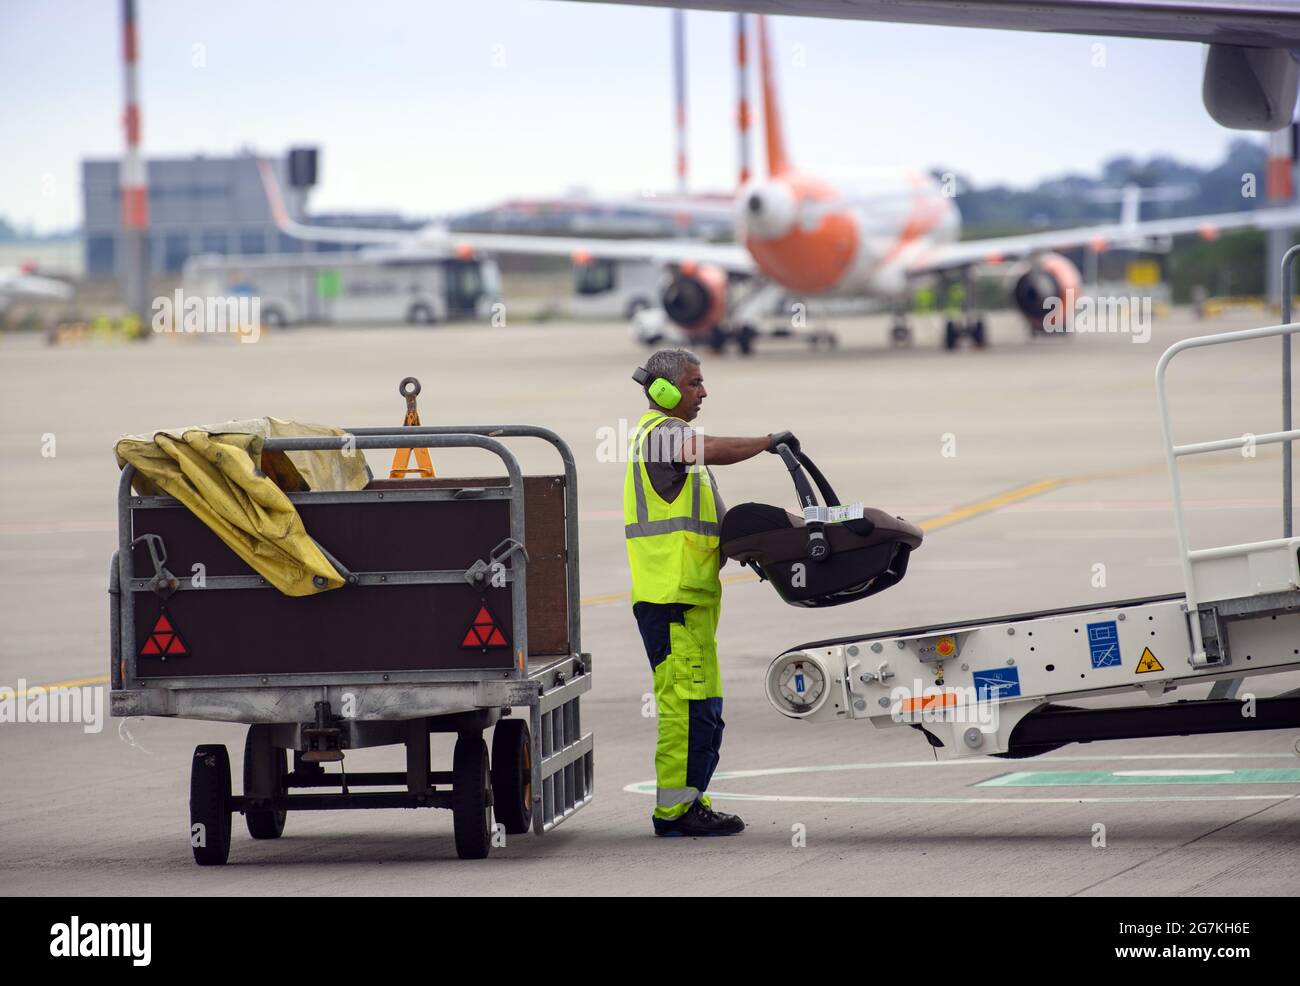 14 July 2021, Brandenburg, Schönefeld: A WISAG Aviation employee loads a child's seat onto the baggage conveyor belt (power stow) on the aircraft on the apron of BER 'Willy Brandt' Airport. During the E-Day, the ground handling service provider presented the Smart Trainer, a ground power unit for supplying power to aircraft waiting at outside positions, and the emission-free handling of an aircraft. The project 'WISAG - Ready for Green' contributes to the reduction of CO2 emissions and thus makes flying more environmentally friendly. Photo: Soeren Stache/dpa-Zentralbild/dpa Stock Photo